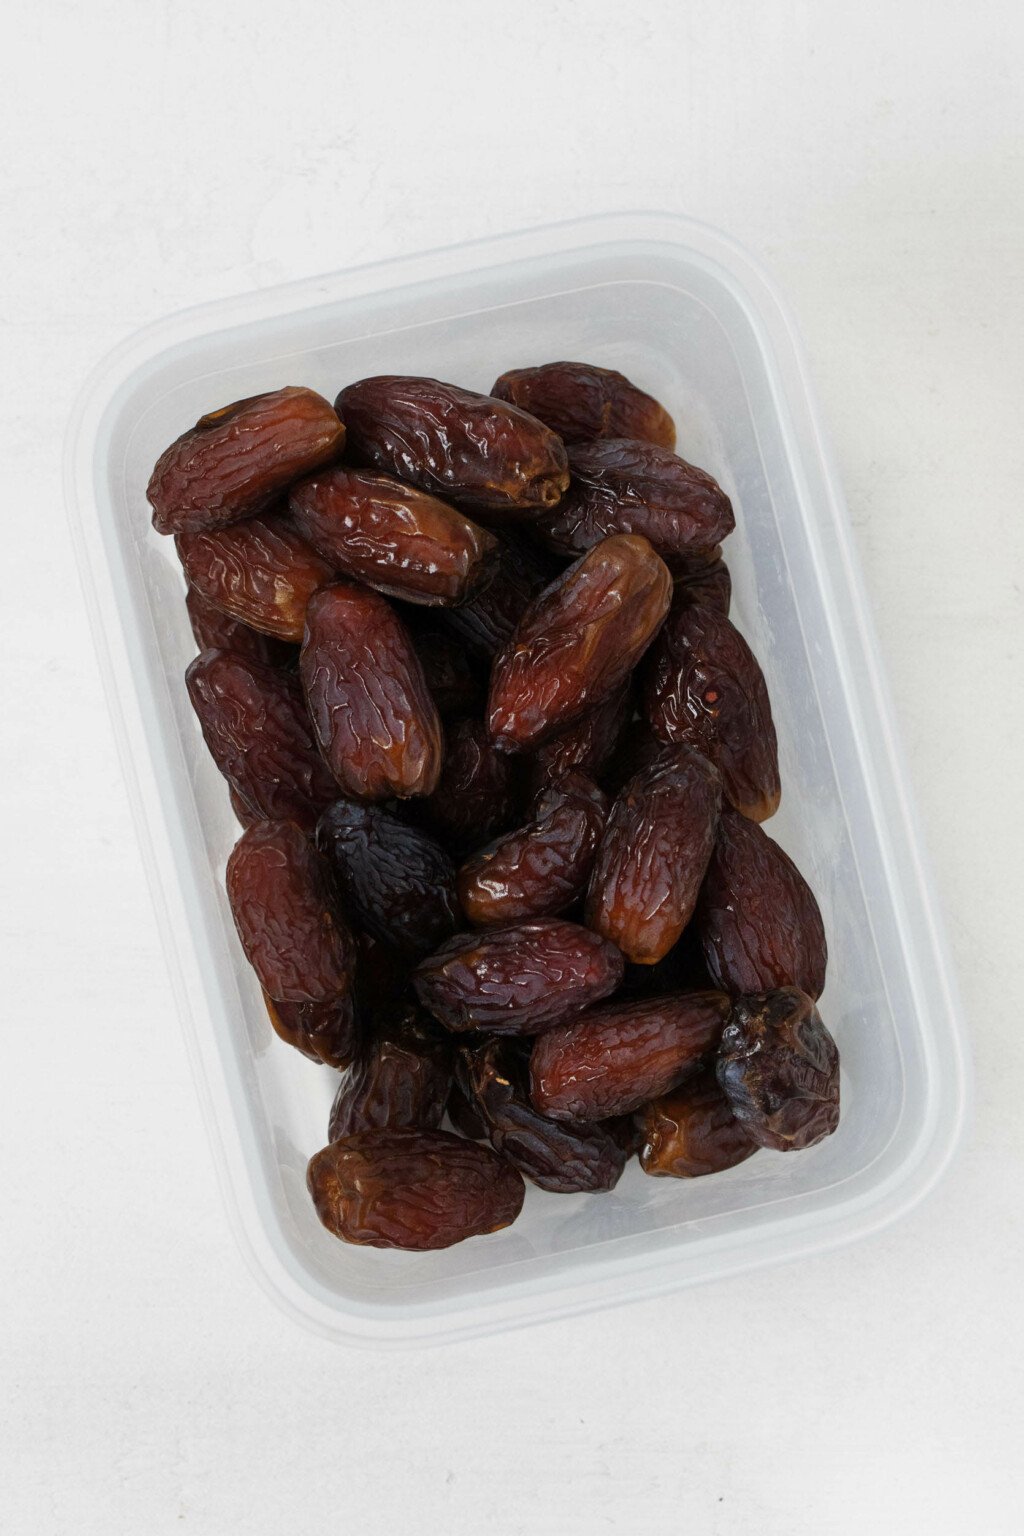 A storage container has been filled with brown, pitted Medjool dates.